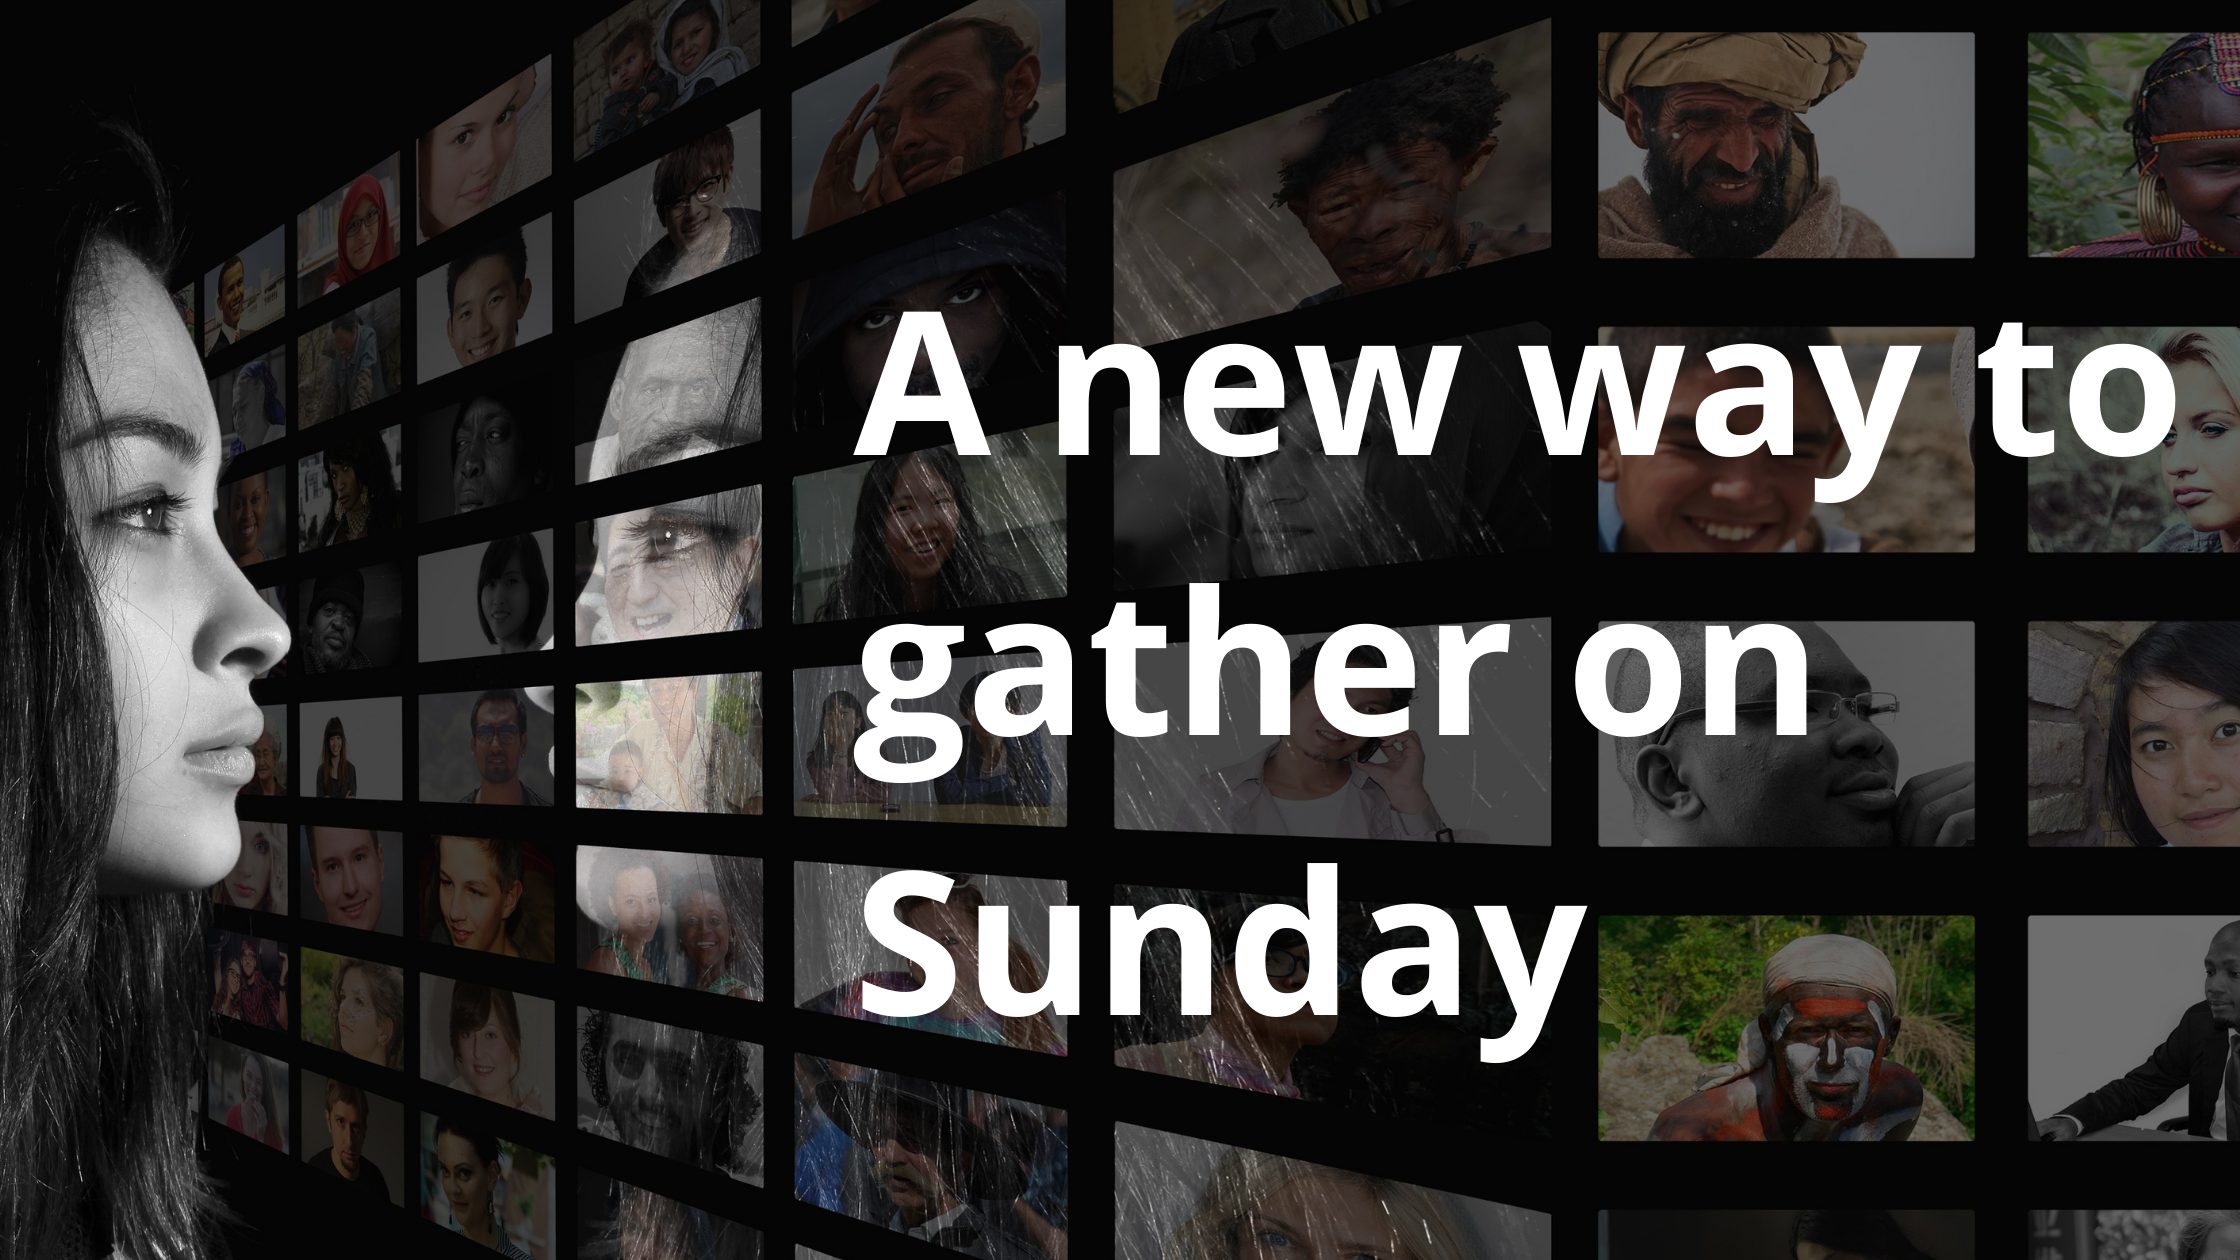 A new way to gather on Sunday